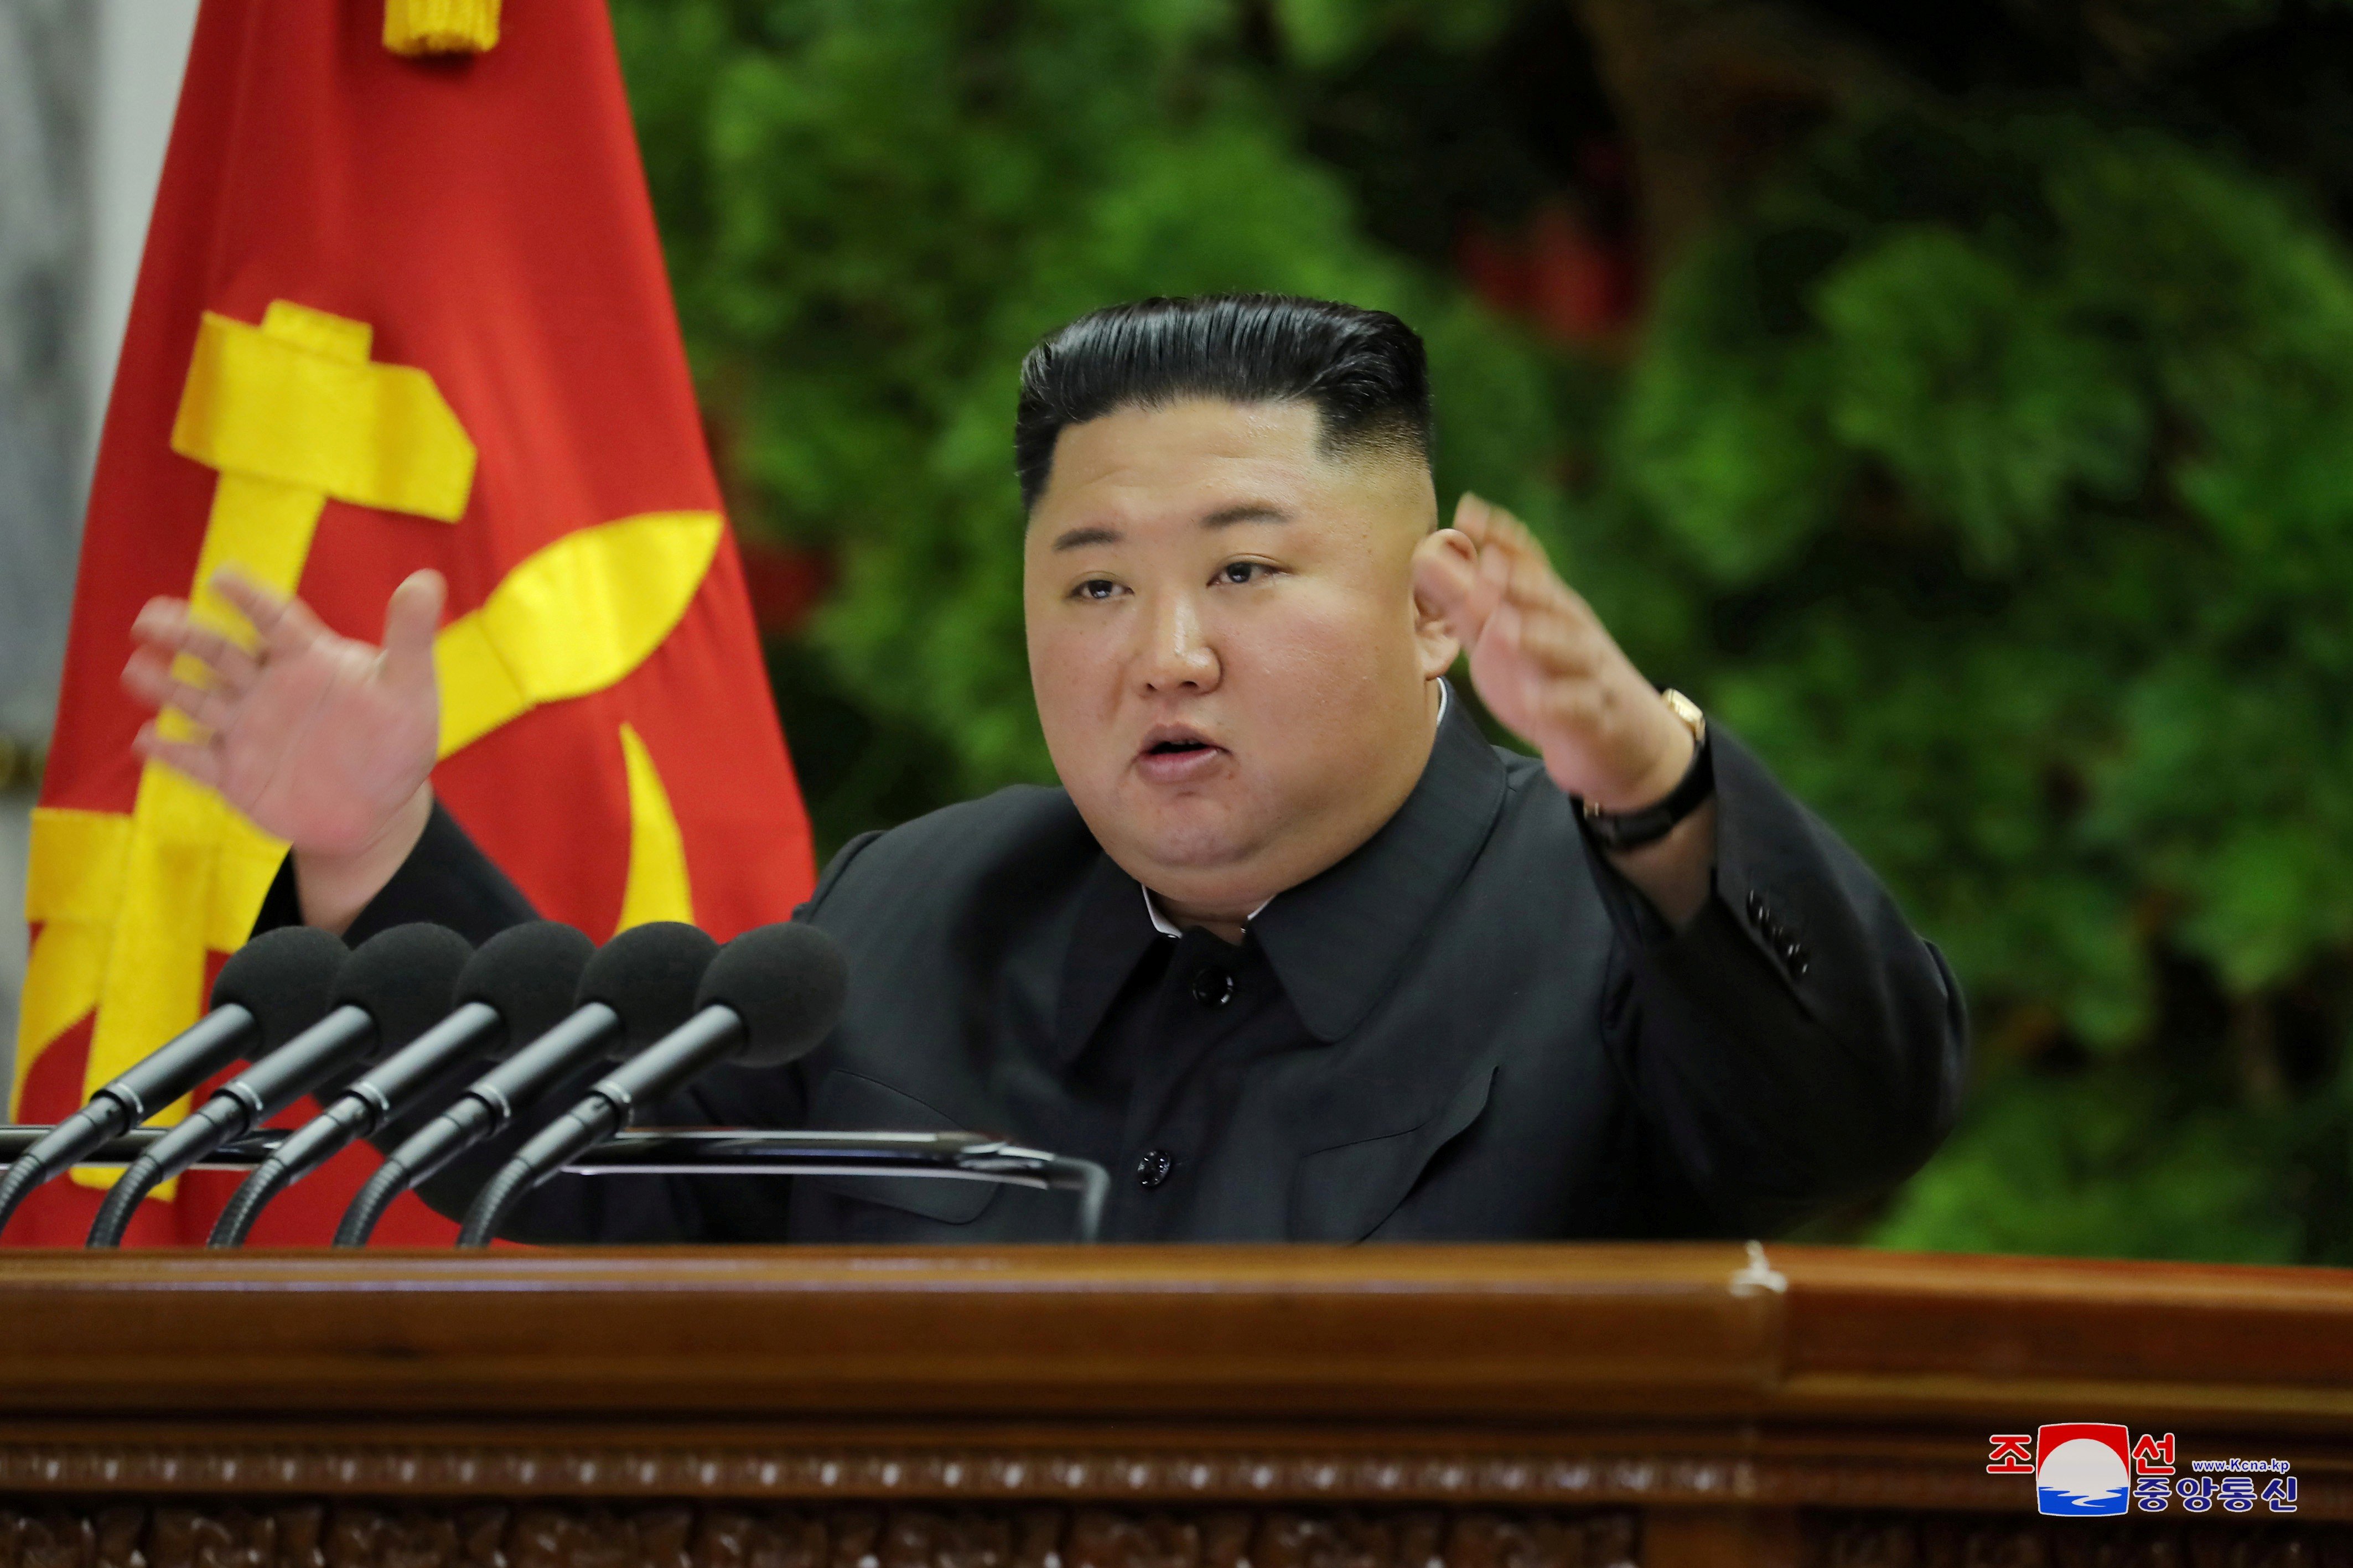 North Korean leader Kim Jong-un began the year with vows to expand Pyongyang’s nuclear arsenal. Photo: Reuters